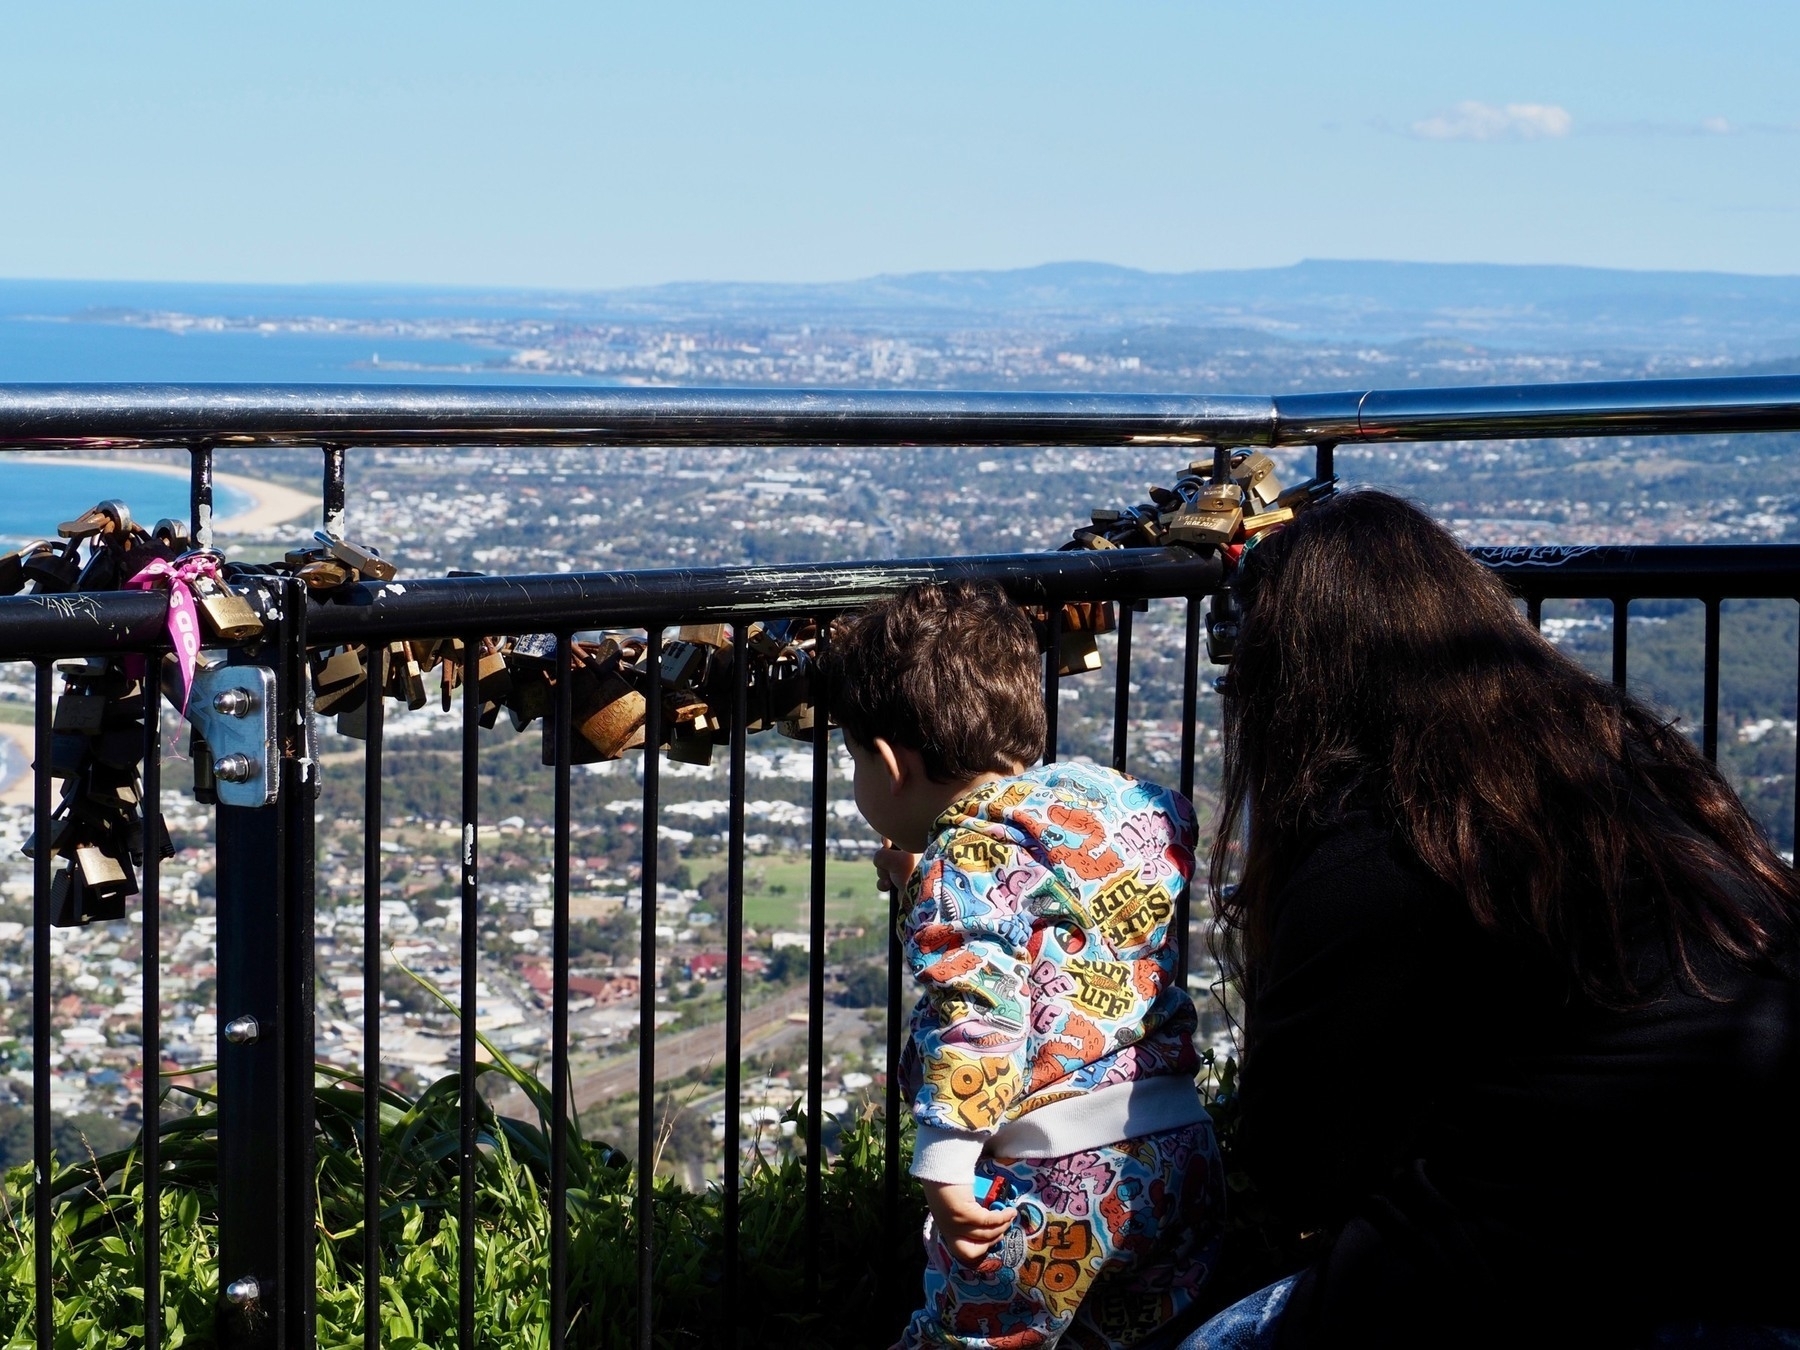 A mother and son look through a metal fence covered in locks over a a city and the sea.